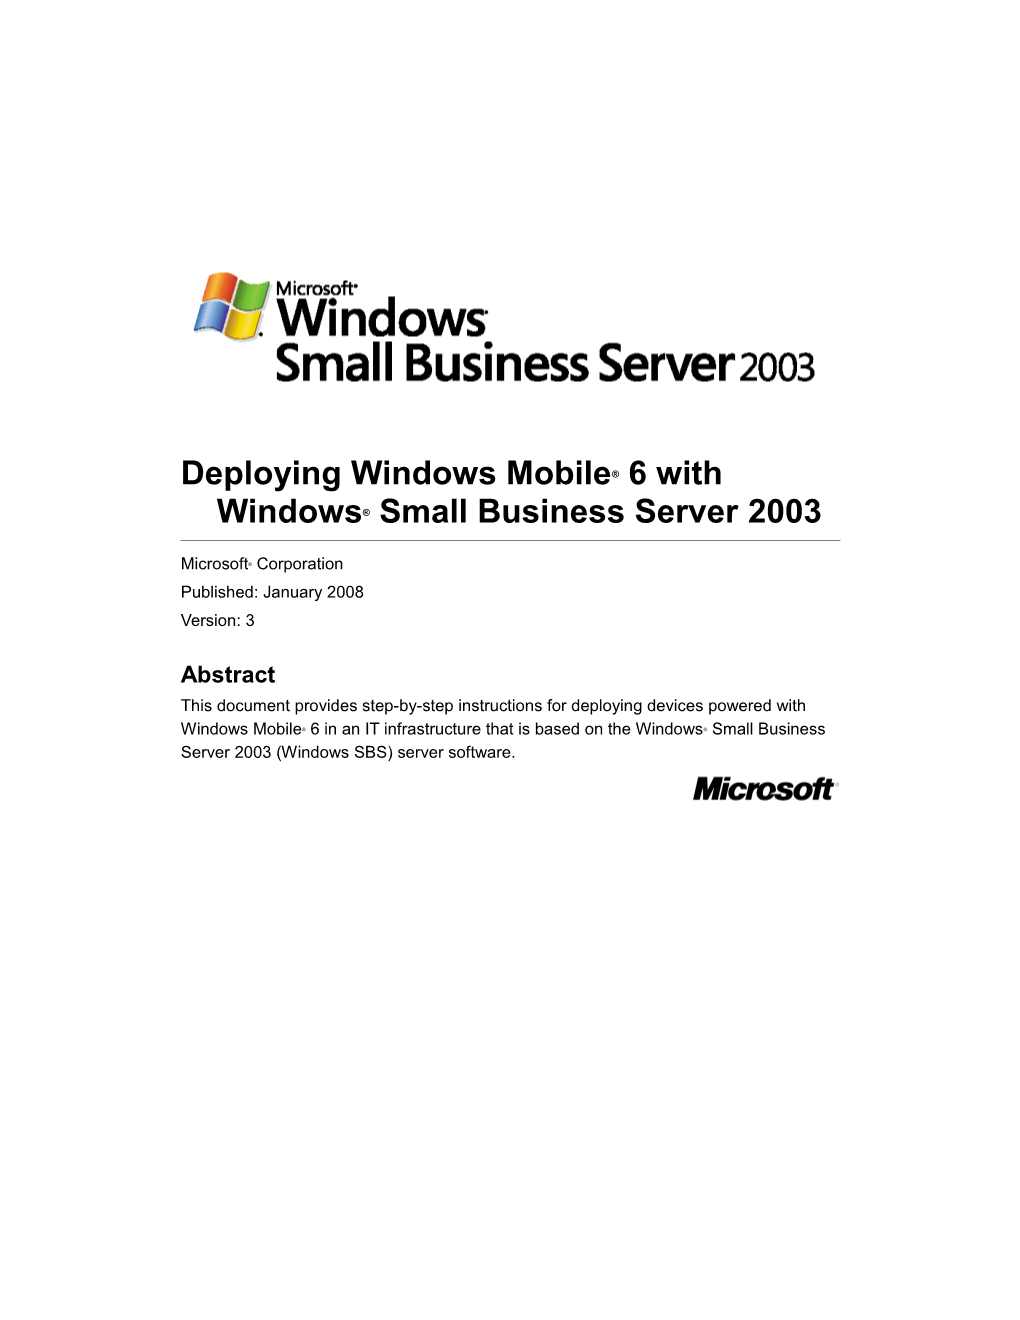 Deploying Windows Mobile 6 with Windows Small Business Server 2003